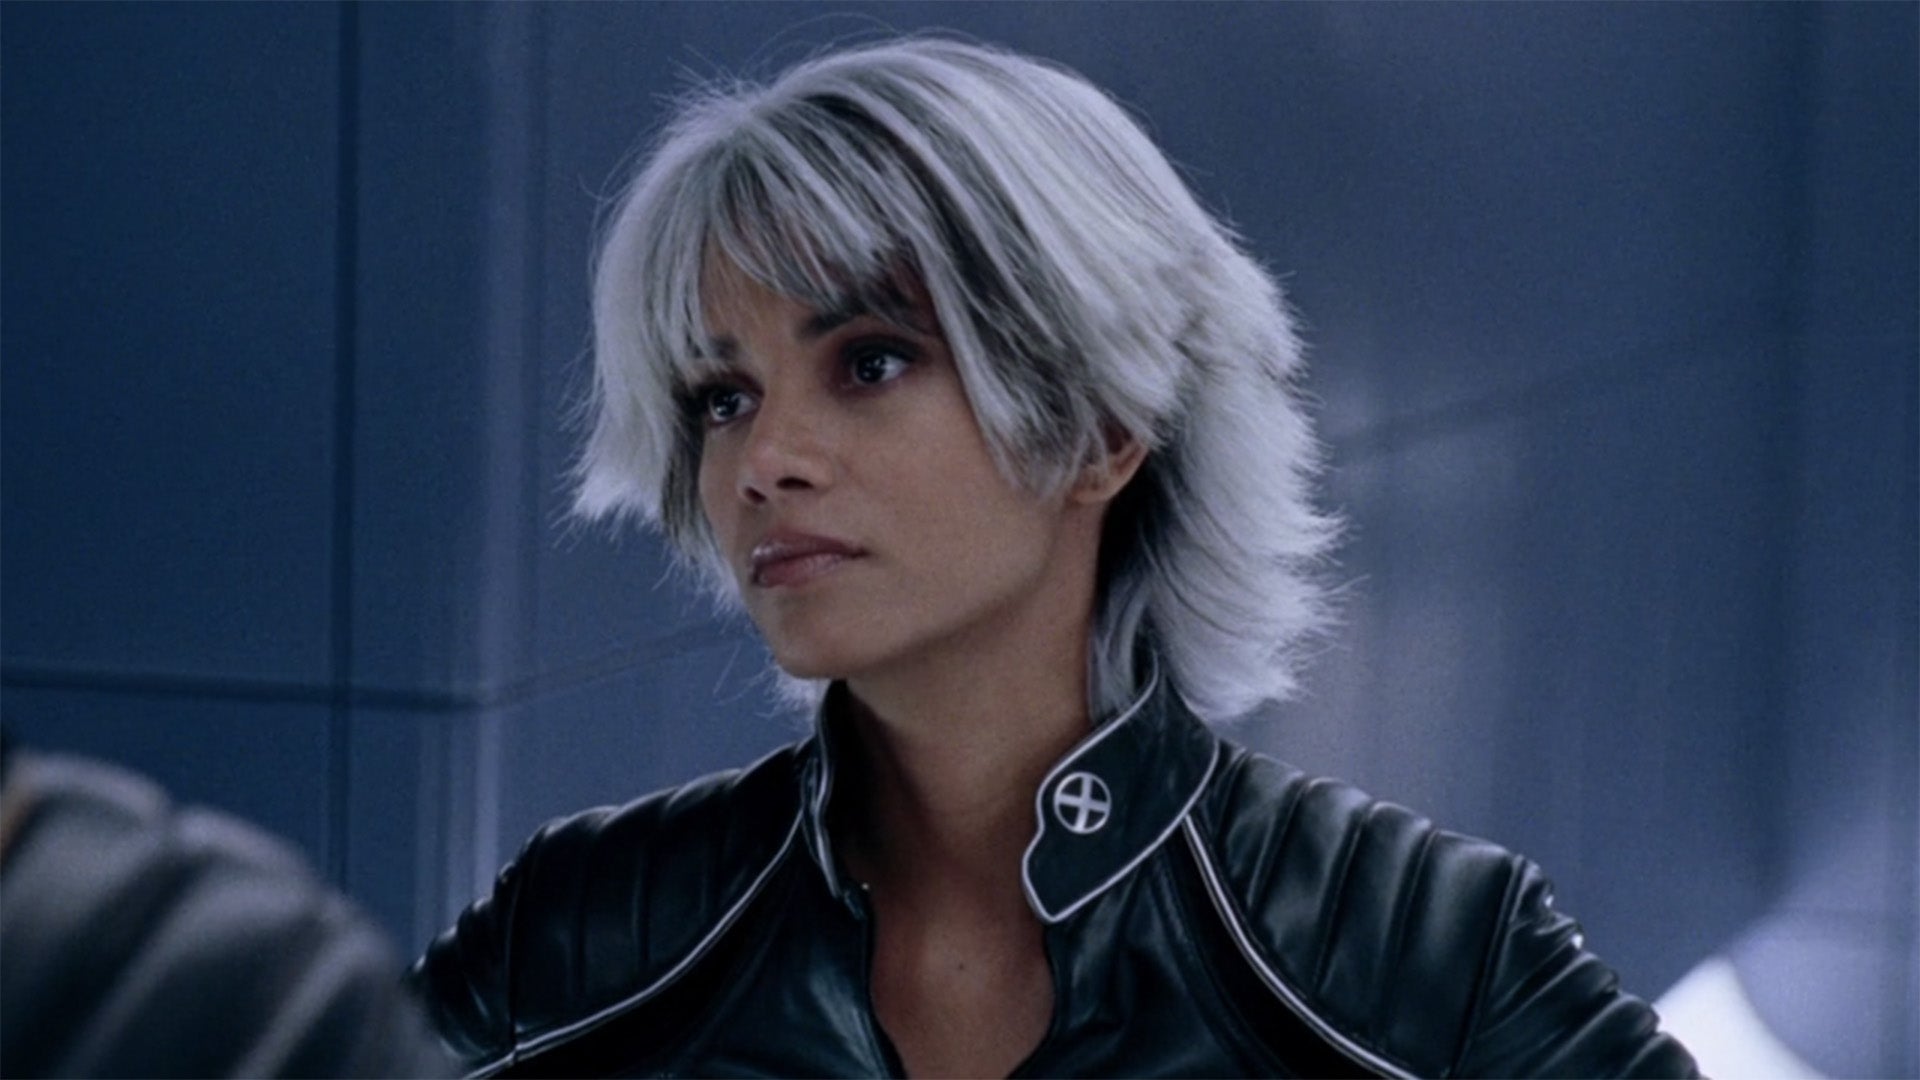 Halle Berry as Storm in X-Men: The Last Stand (Image: 20th Century Fox)